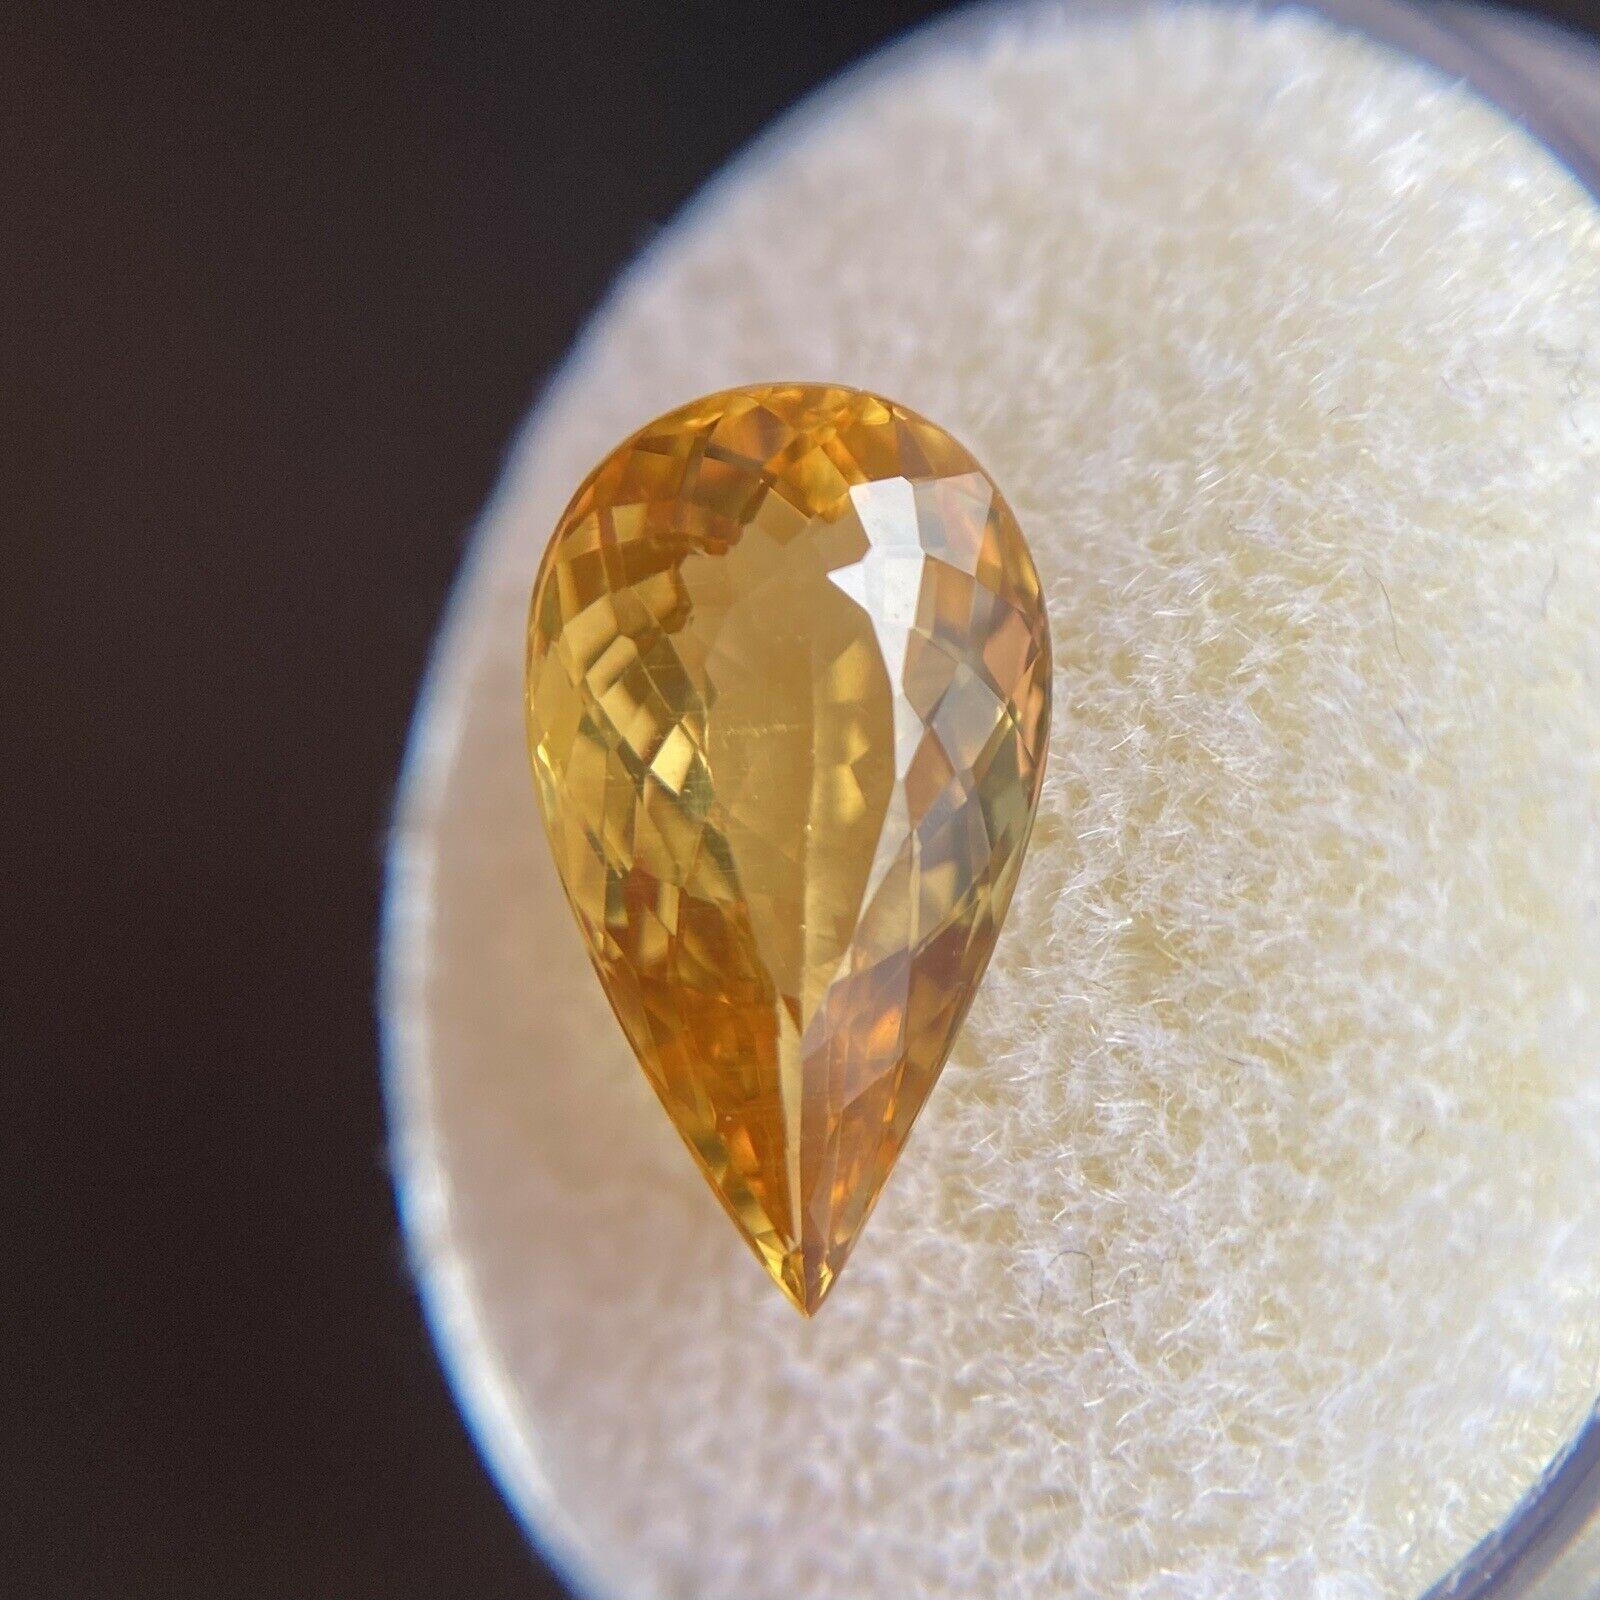 Bright Yellow Golden Heliodor Beryl 3.43ct Pear Cut 14 x 8mm Loose Gemstone

Natural Golden Yellow Beryl Heliodor Gemstone. 
3.43 Carat stone with a beautiful golden yellow colour and excellent clarity. Very clean gemstone. 
This stone has an